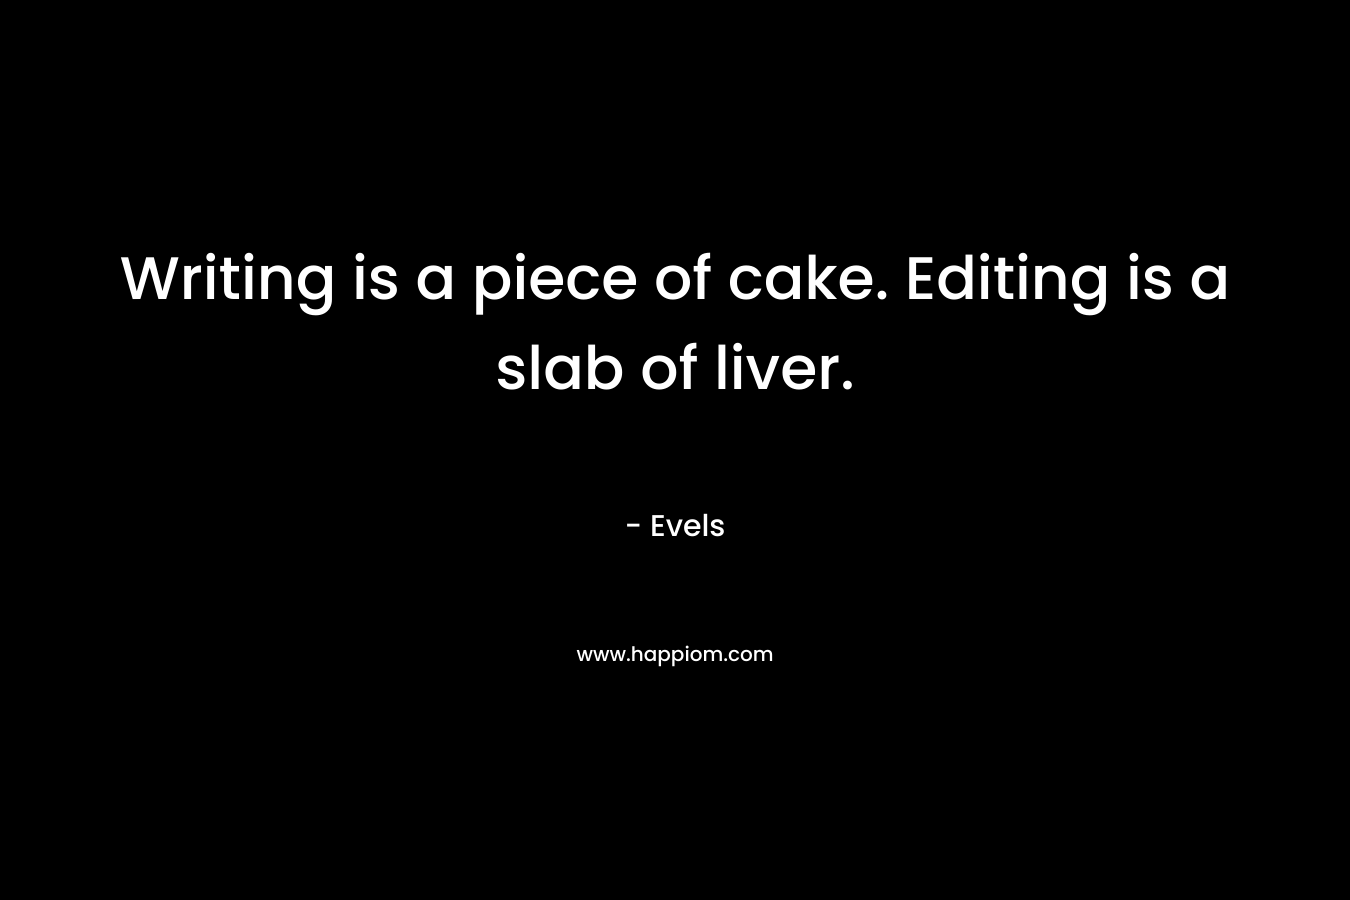 Writing is a piece of cake. Editing is a slab of liver. – Evels